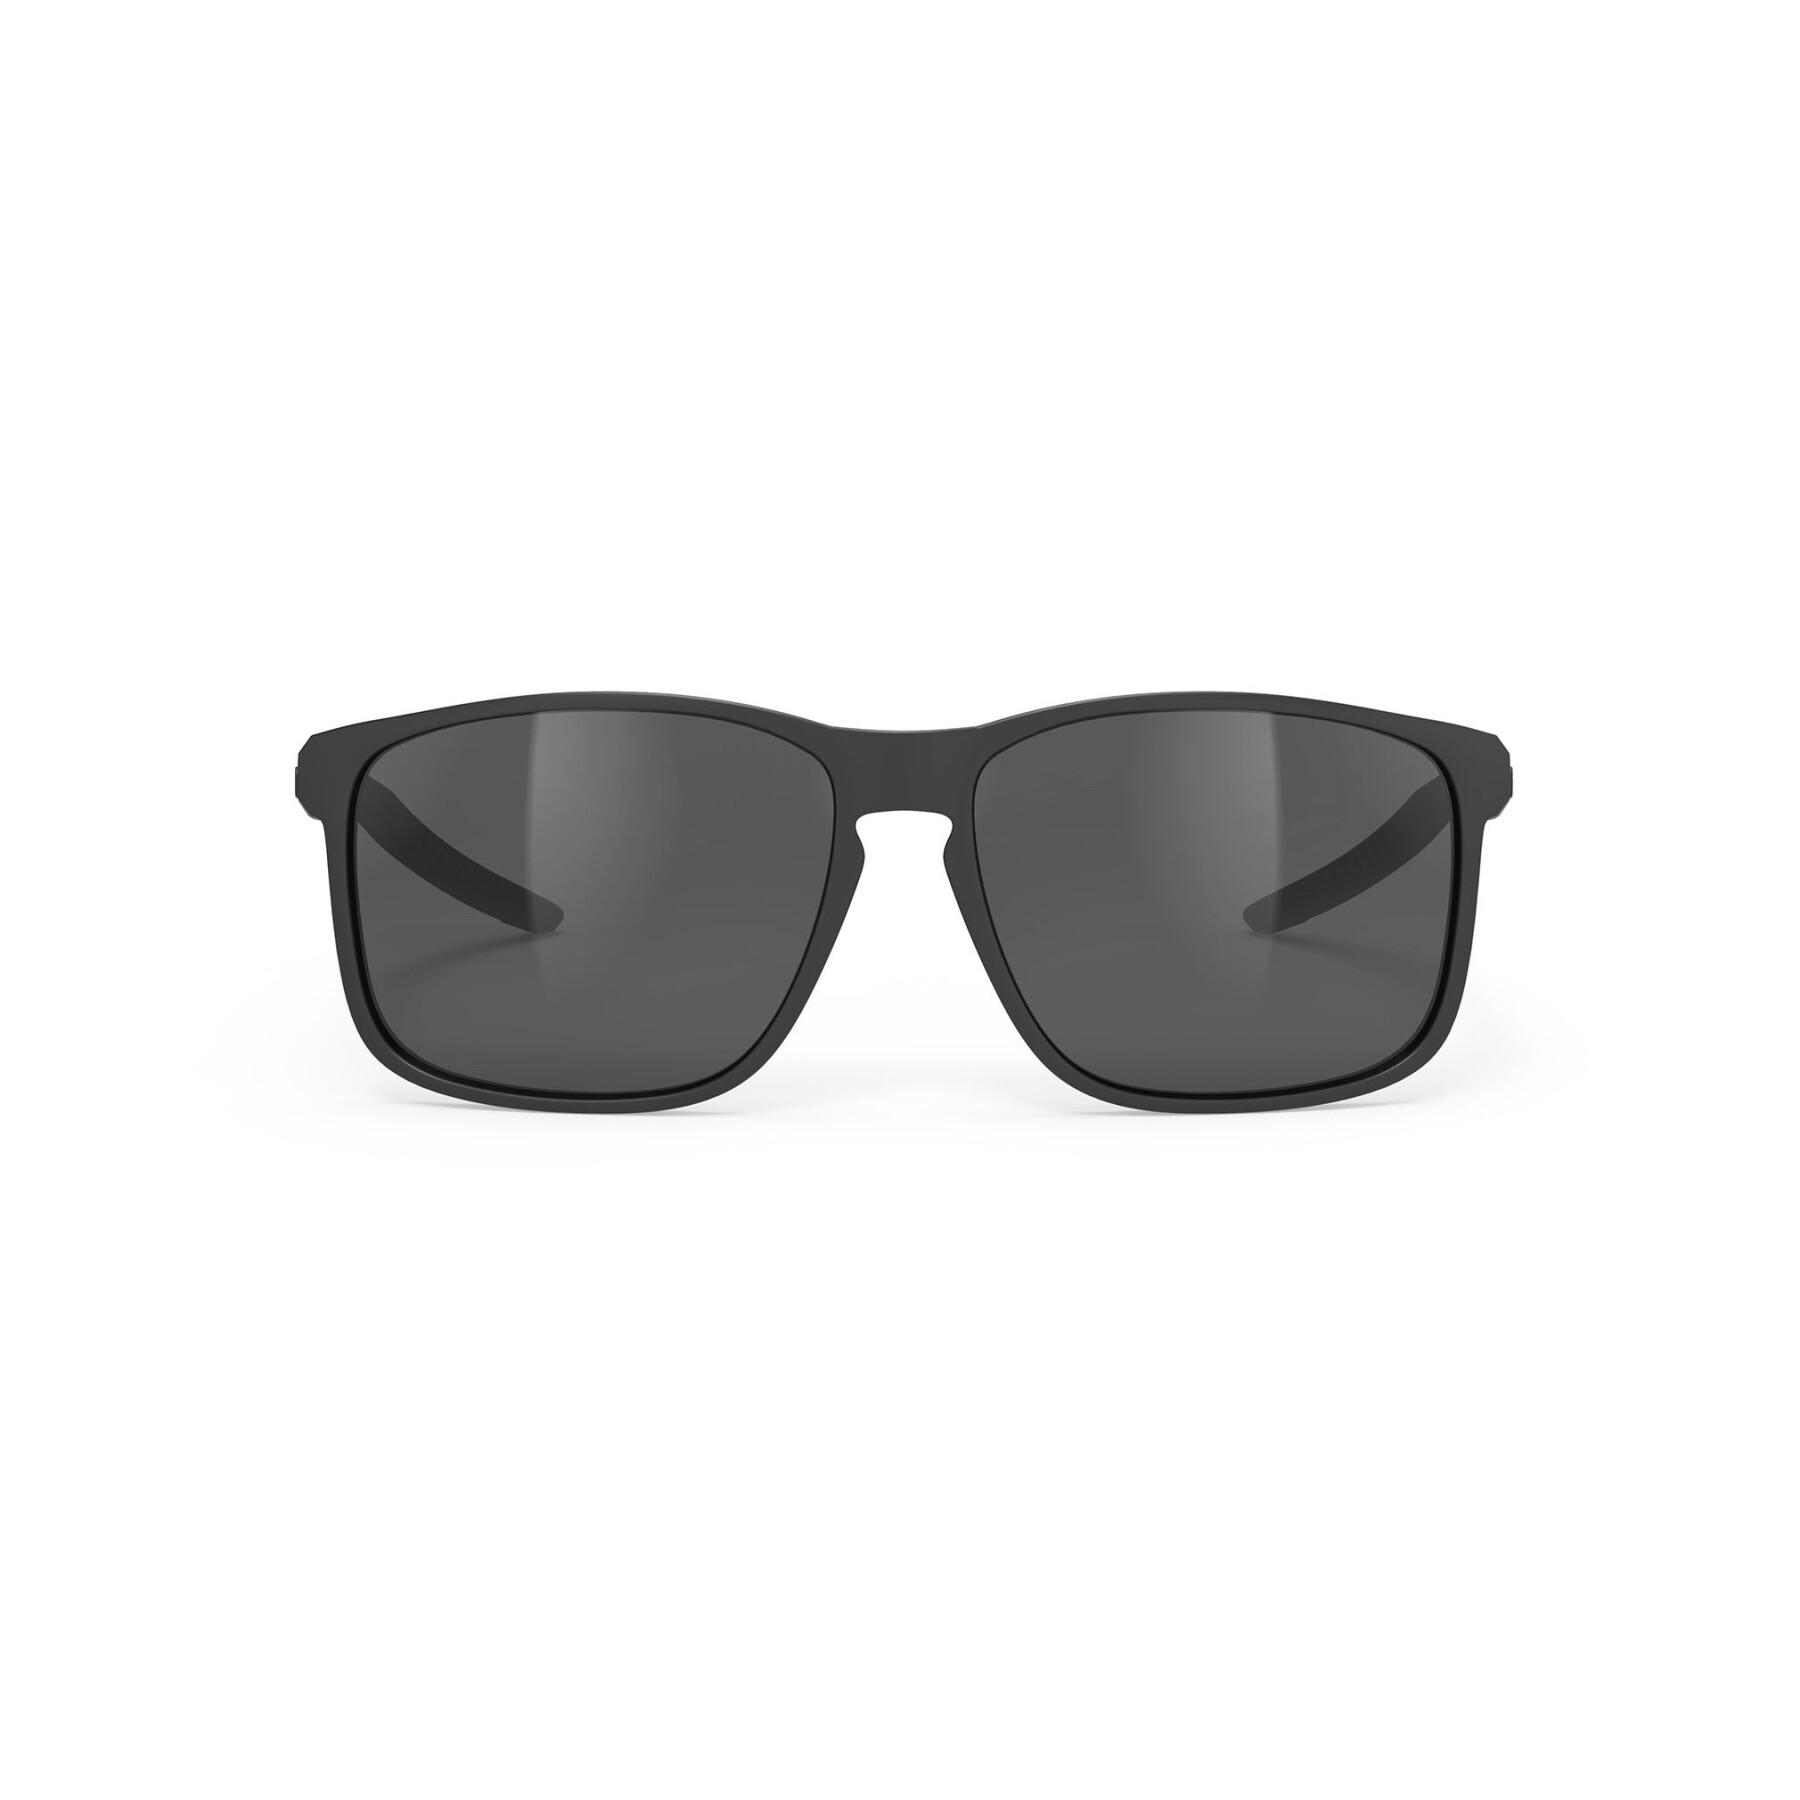 Sonnenbrille Rudy Project overlap